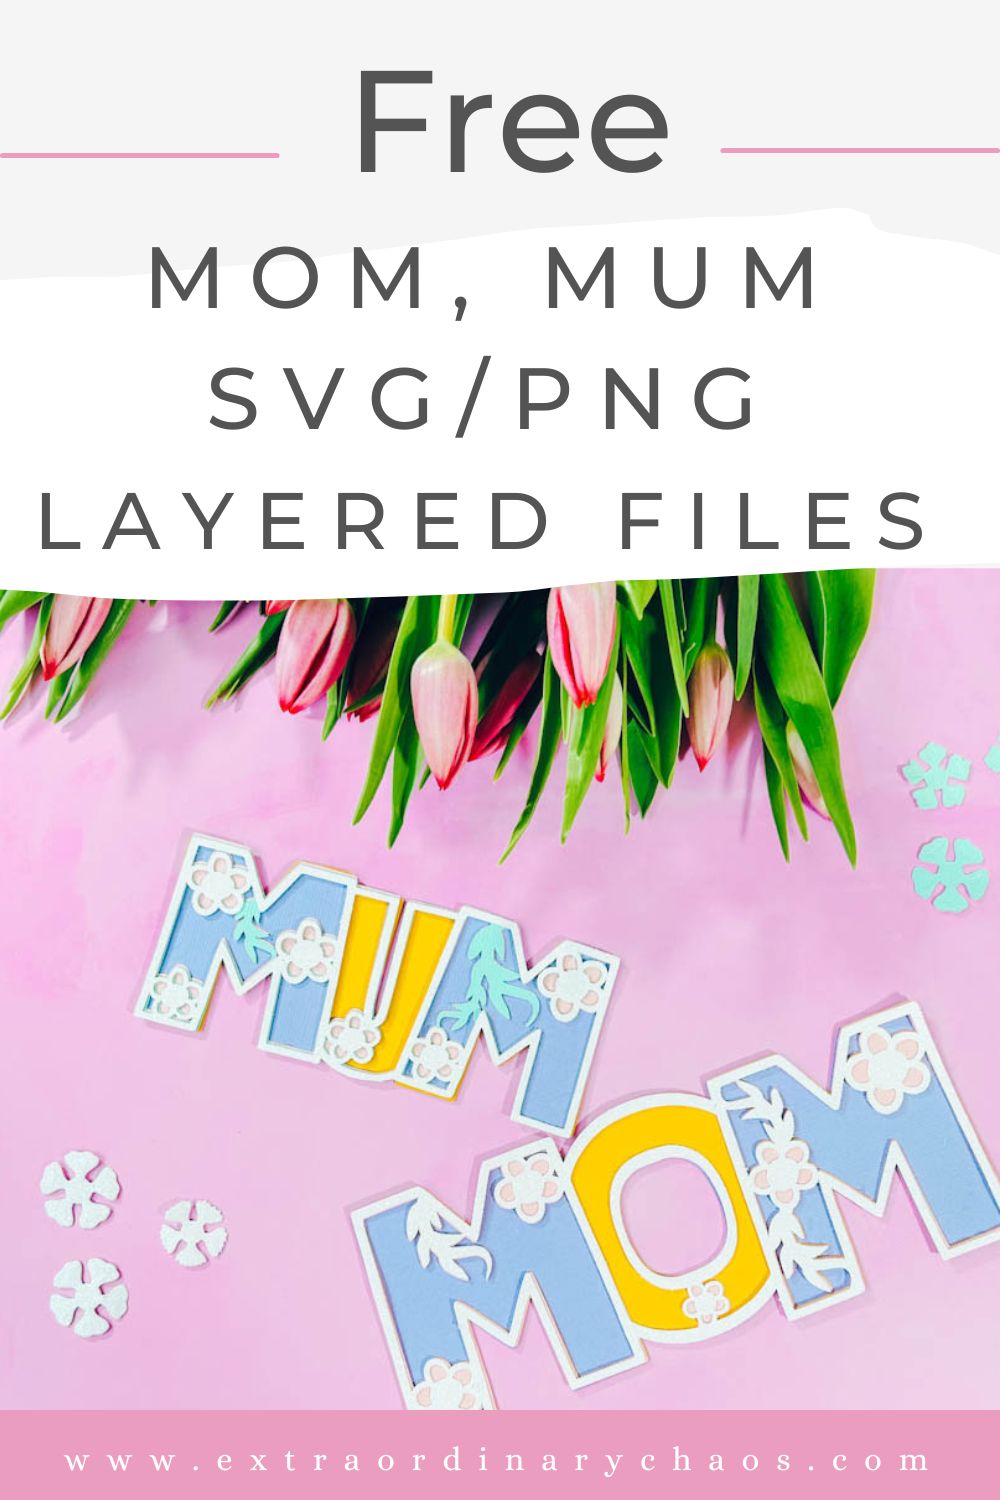 Free Mum, Mom SVG file for Cricut and Silhouette for Mothers Day and Birthday cards, crafts and scrapbooking